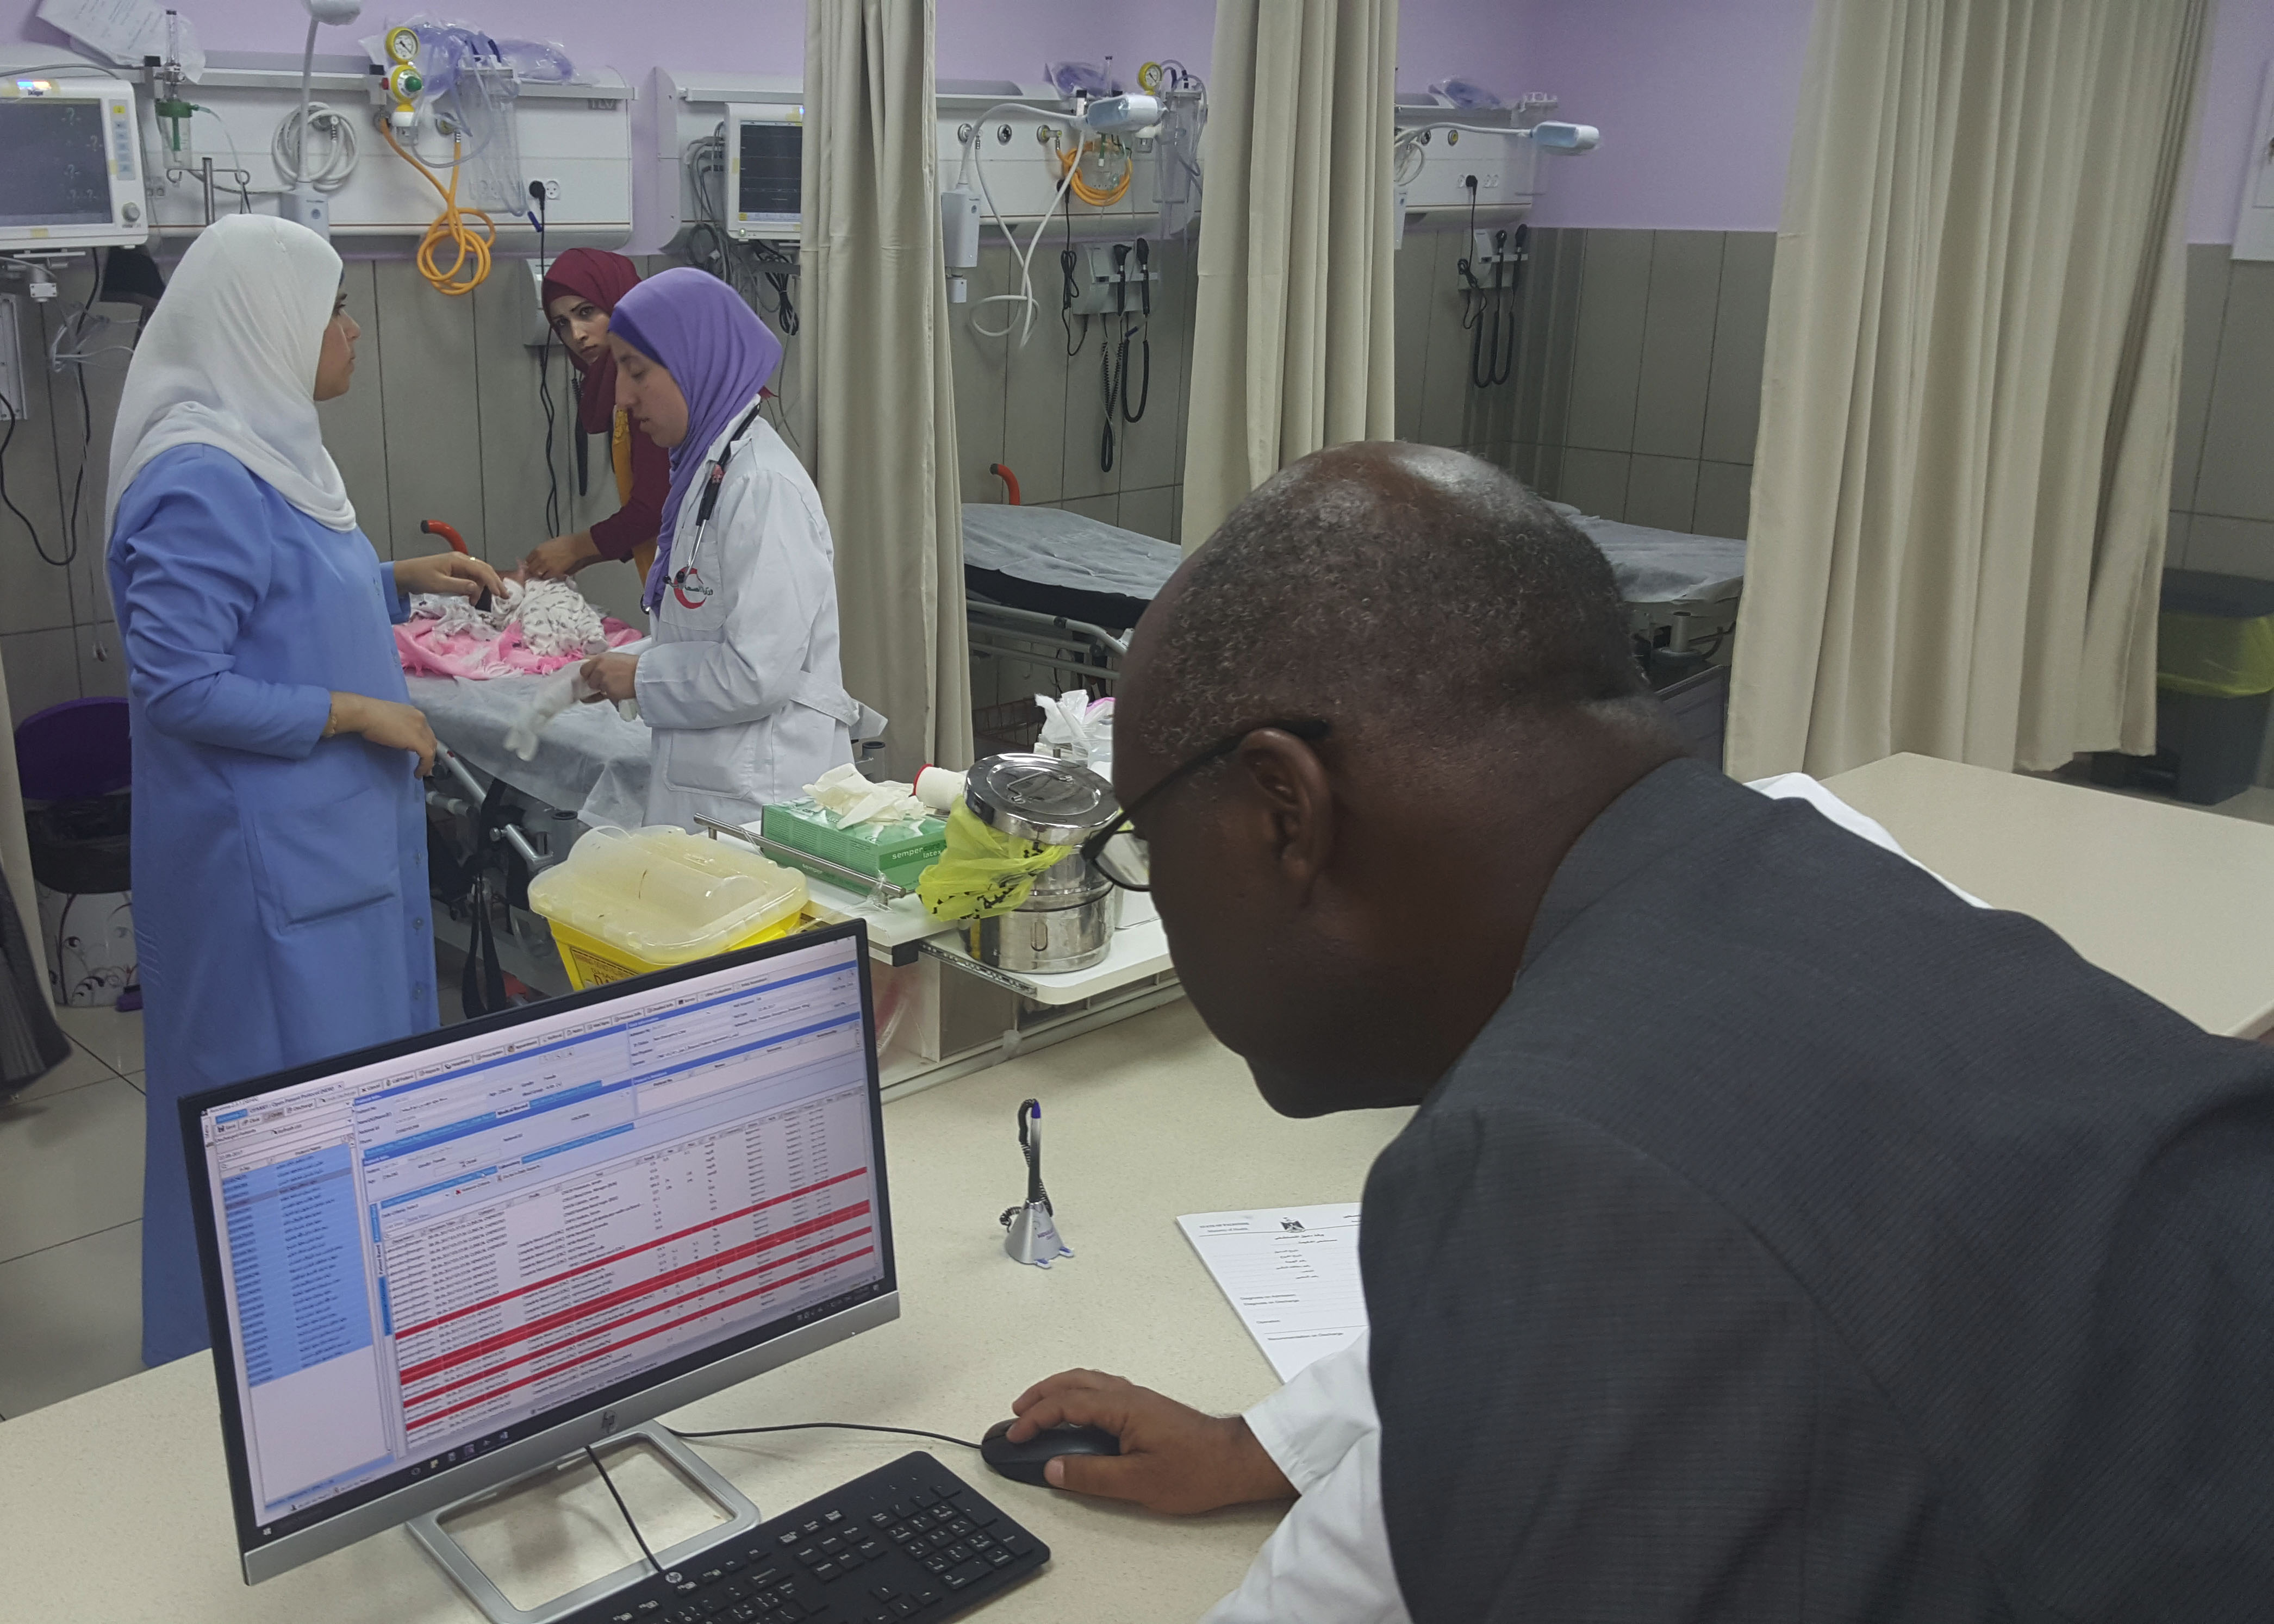 health information system at Palestinian Medical Complex